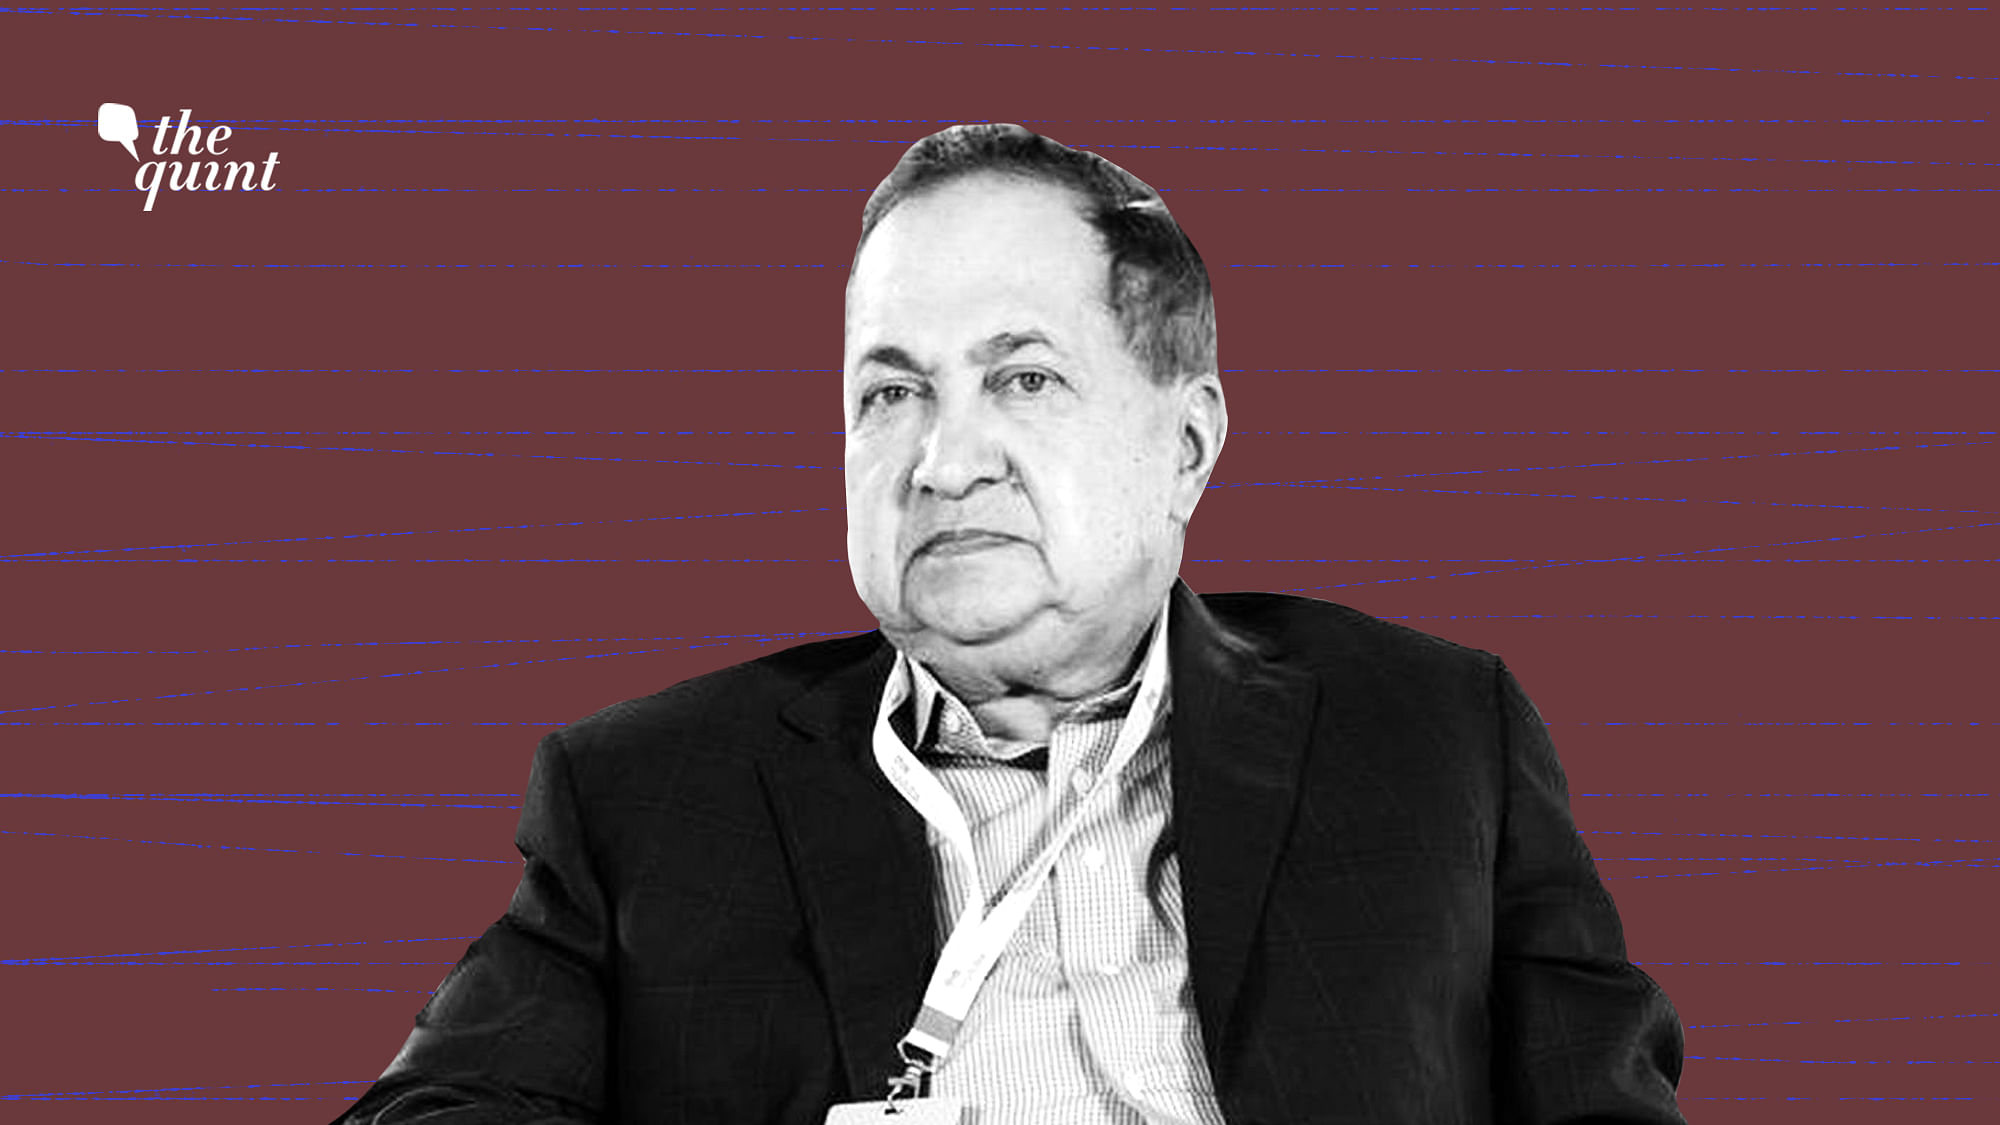 Image of The Hindu Publishing Group’s Chairman, N Ram, used for representational purposes.